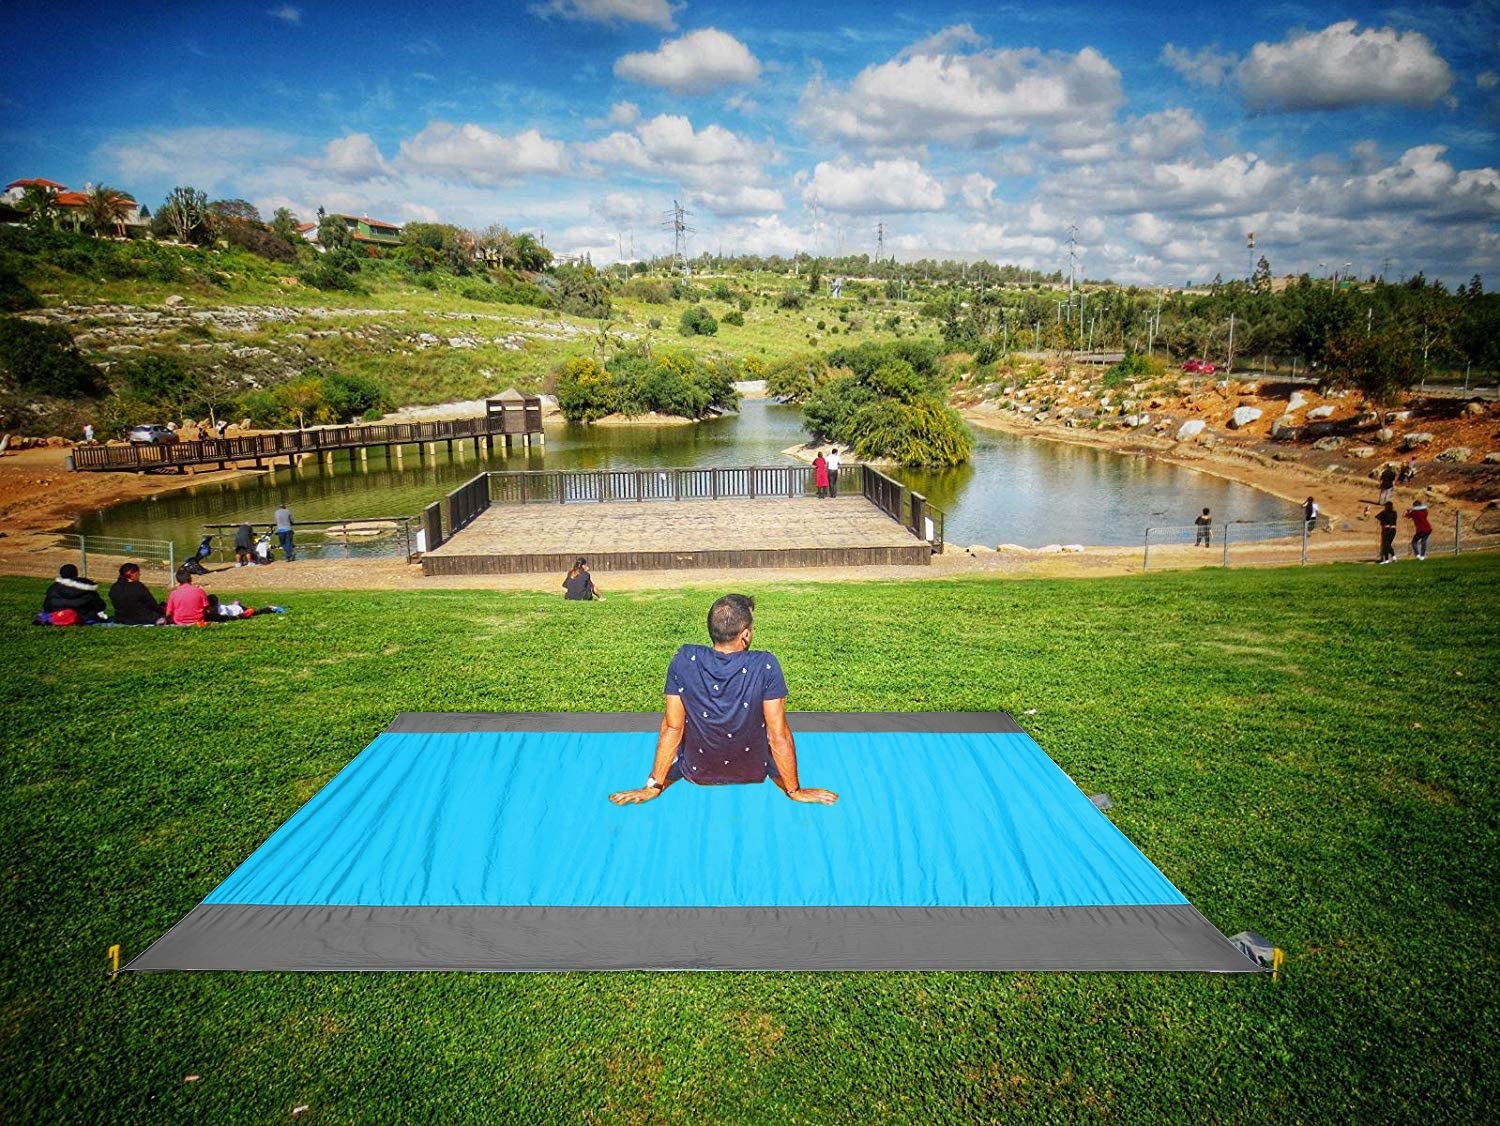 Compact Lightweight Picnic Blanket Outdoor EXTSUD Beach Blanket Picnic Blanket Waterproof Backing Outdoor Nylon Beach Mat 210x200cm Waterproof and Sand Proof Strong Ripstop Sand Mat & Anchor 